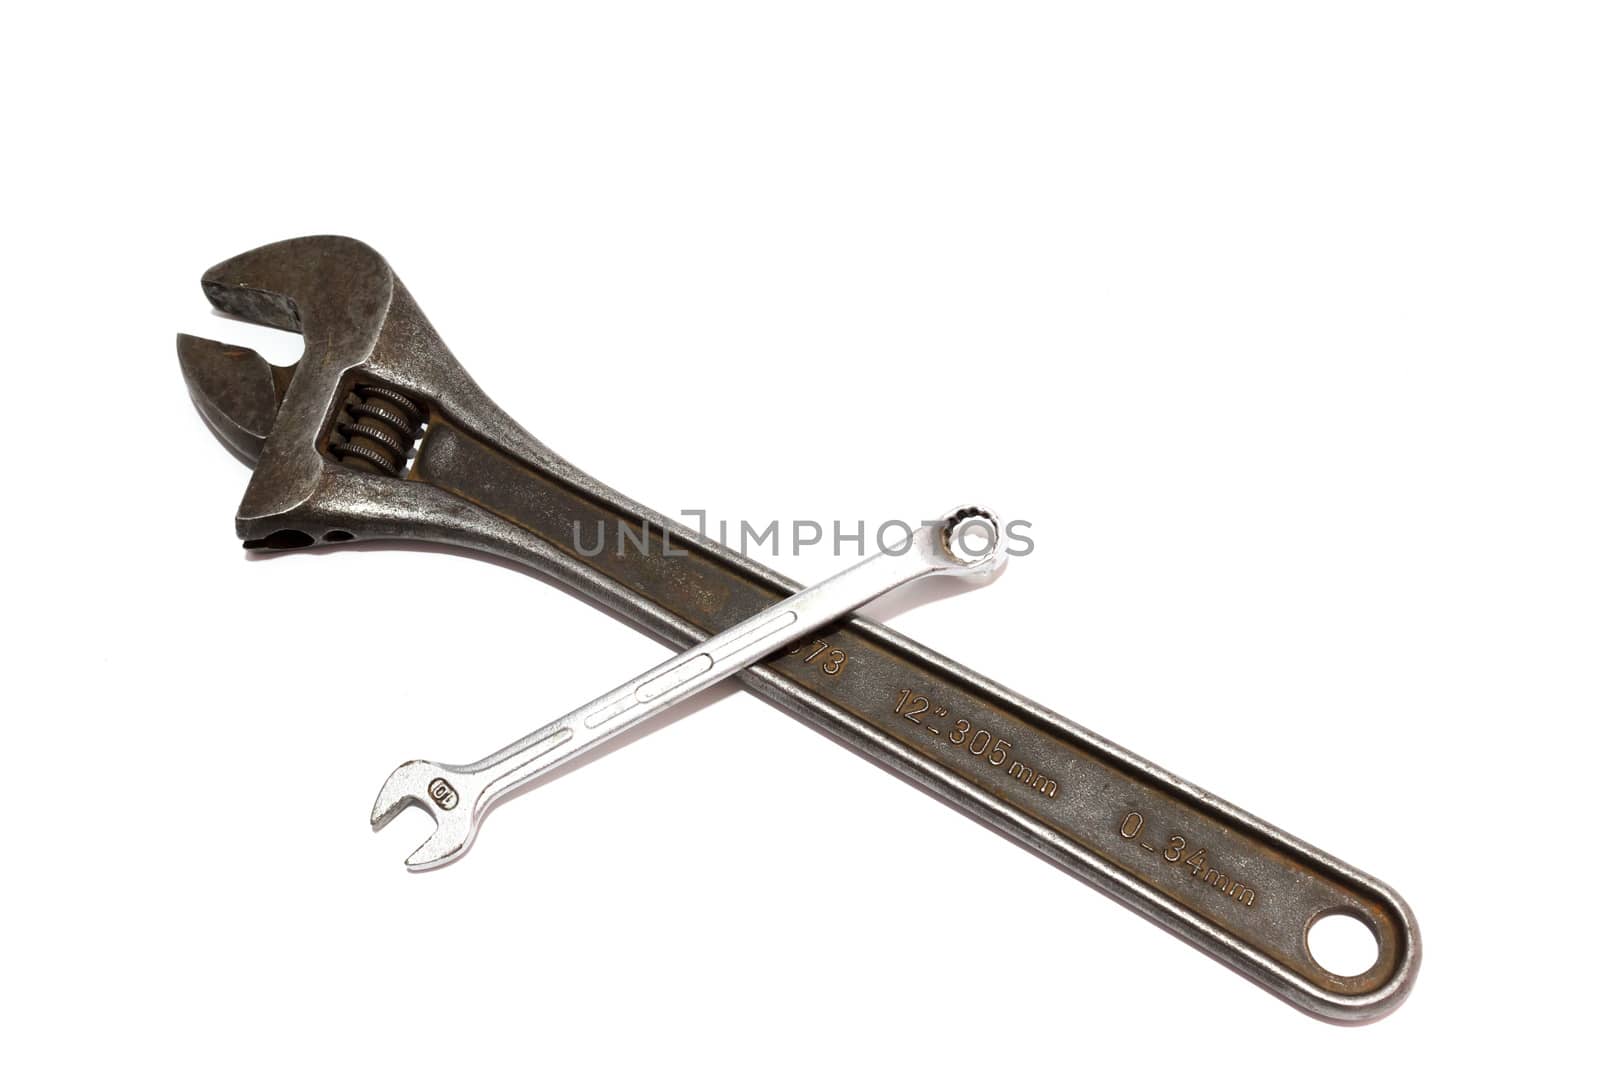 Adjustable Spanner On A White Background by RiaanAlbrecht